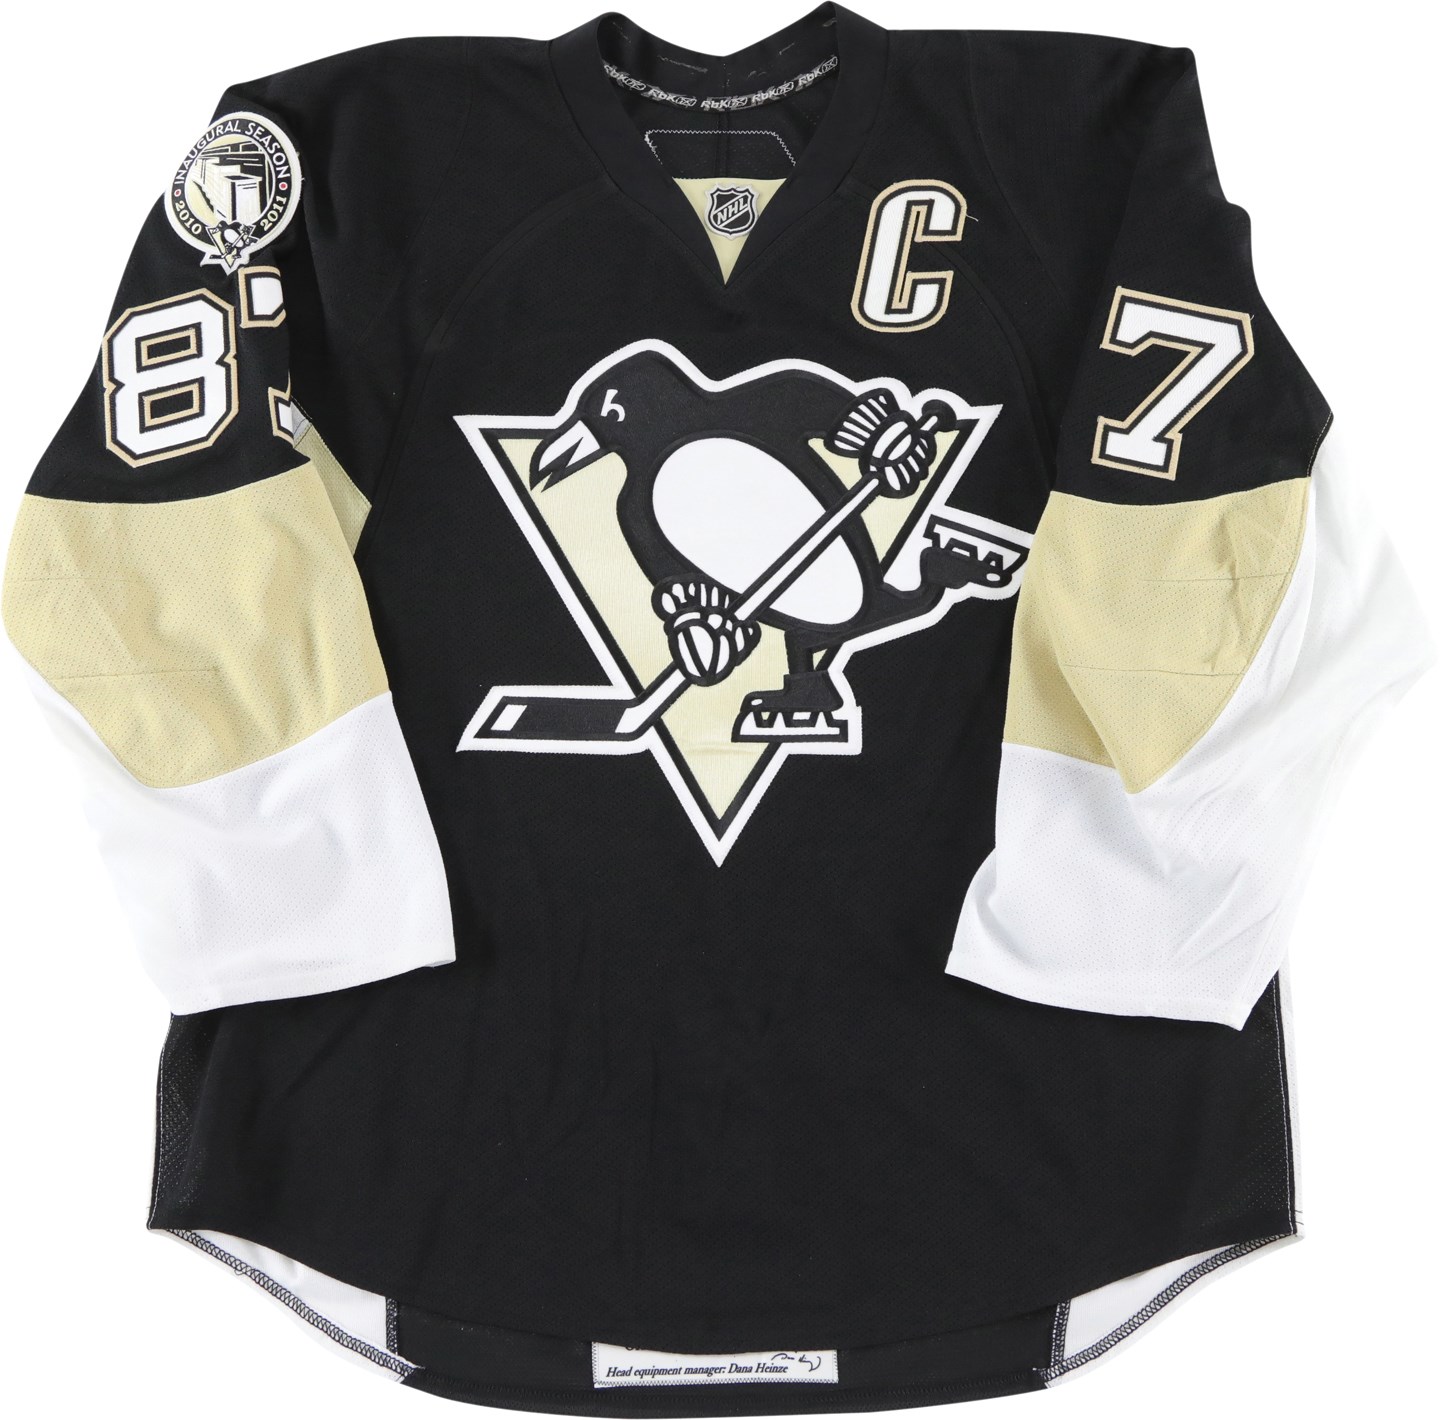 Hockey - 2010-11 Sidney Crosby Pittsburgh Penguins Signed Team Issued Jersey (Penguins LOA & PSA)